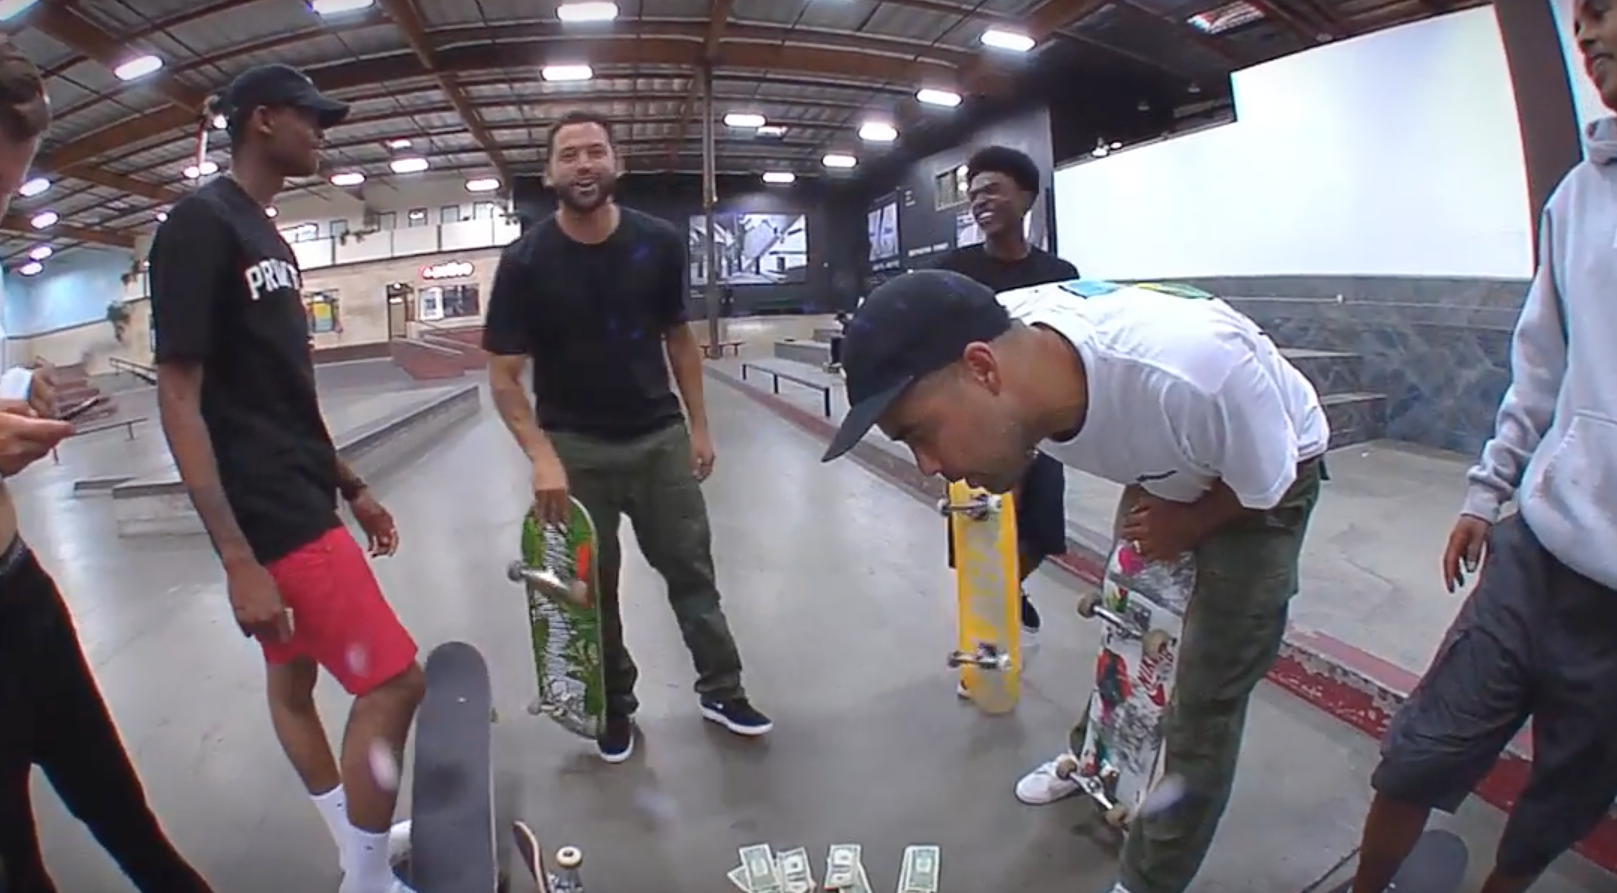 Eric Koston, Paul Rodriguez & the Primitive Skate Team Link up to Play 'Skate or Dice!'